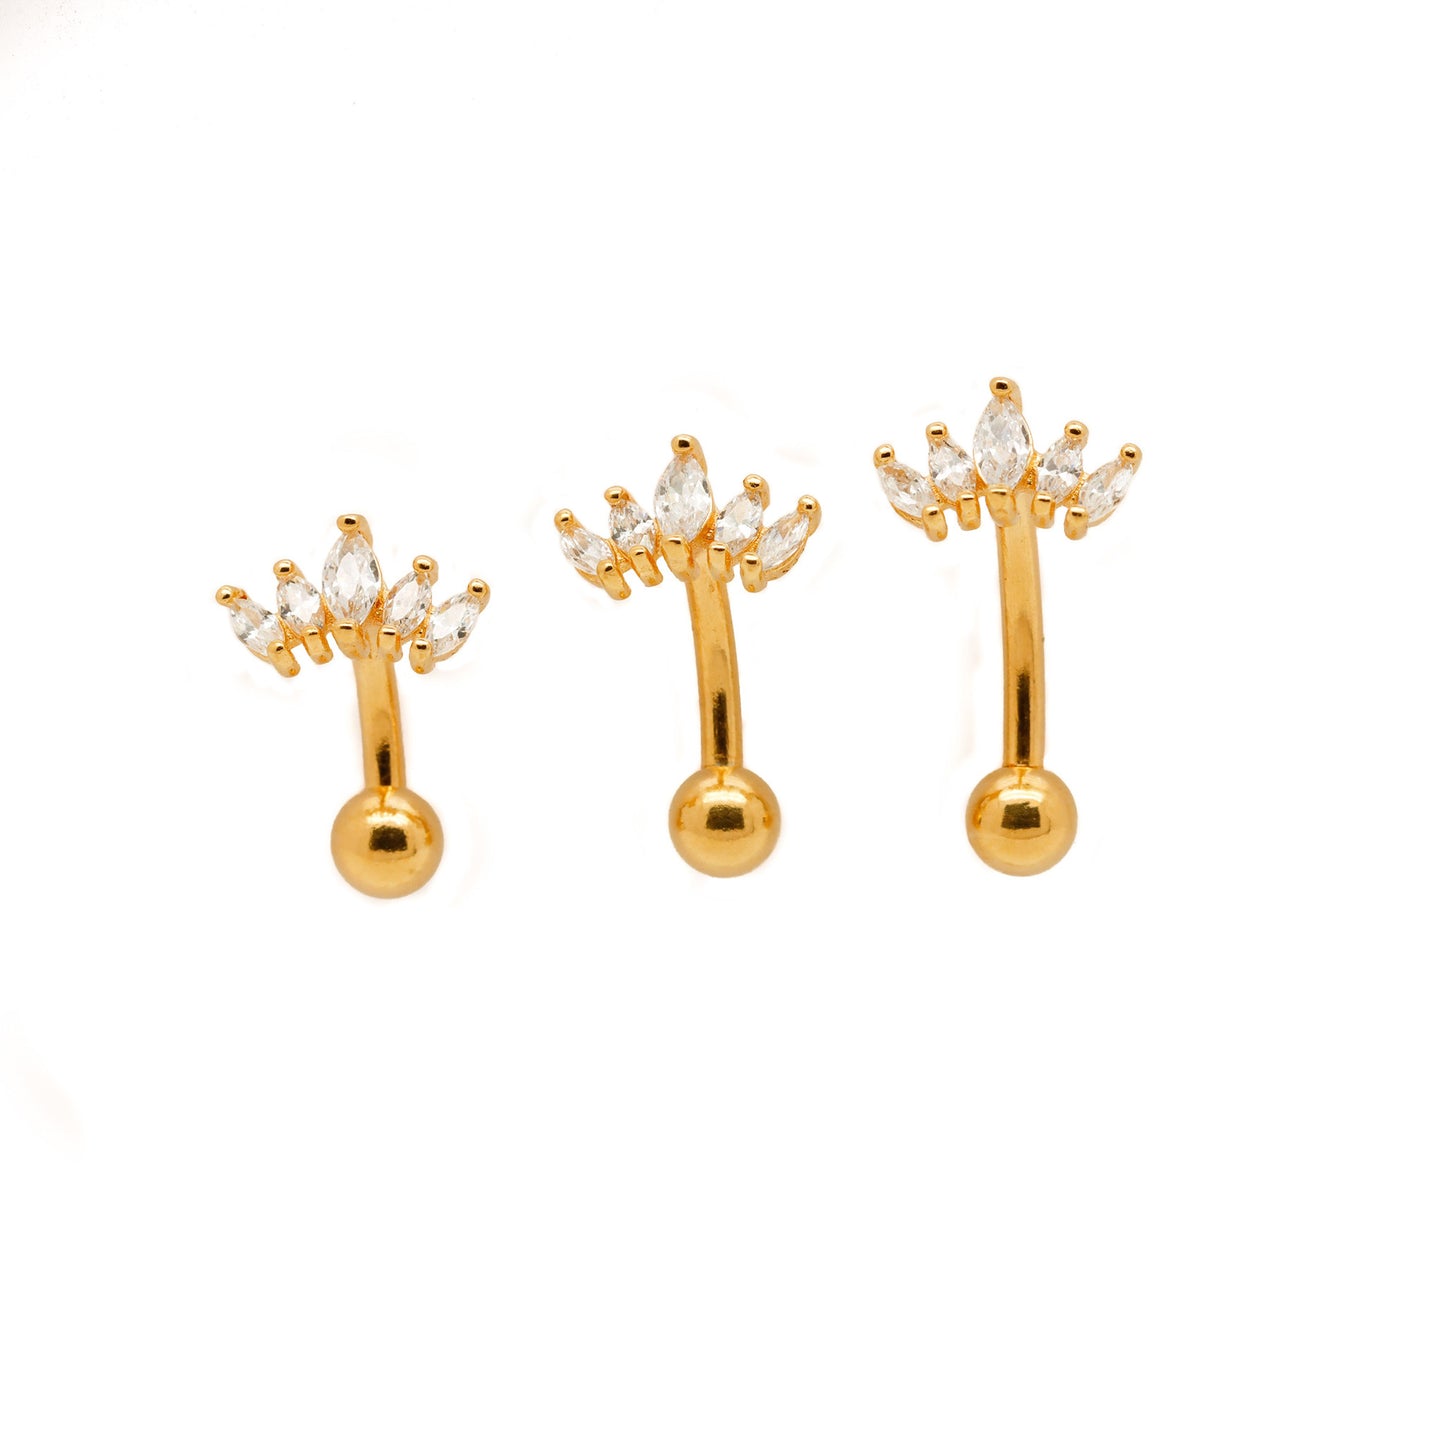 Vermeil | 24k Gold Coated 925 Silver 16G/14G Petite Tiara Reverse Belly Ring | 6mm 1/4" 8mm 5/16" 10mm 3/8" - Sturdy South